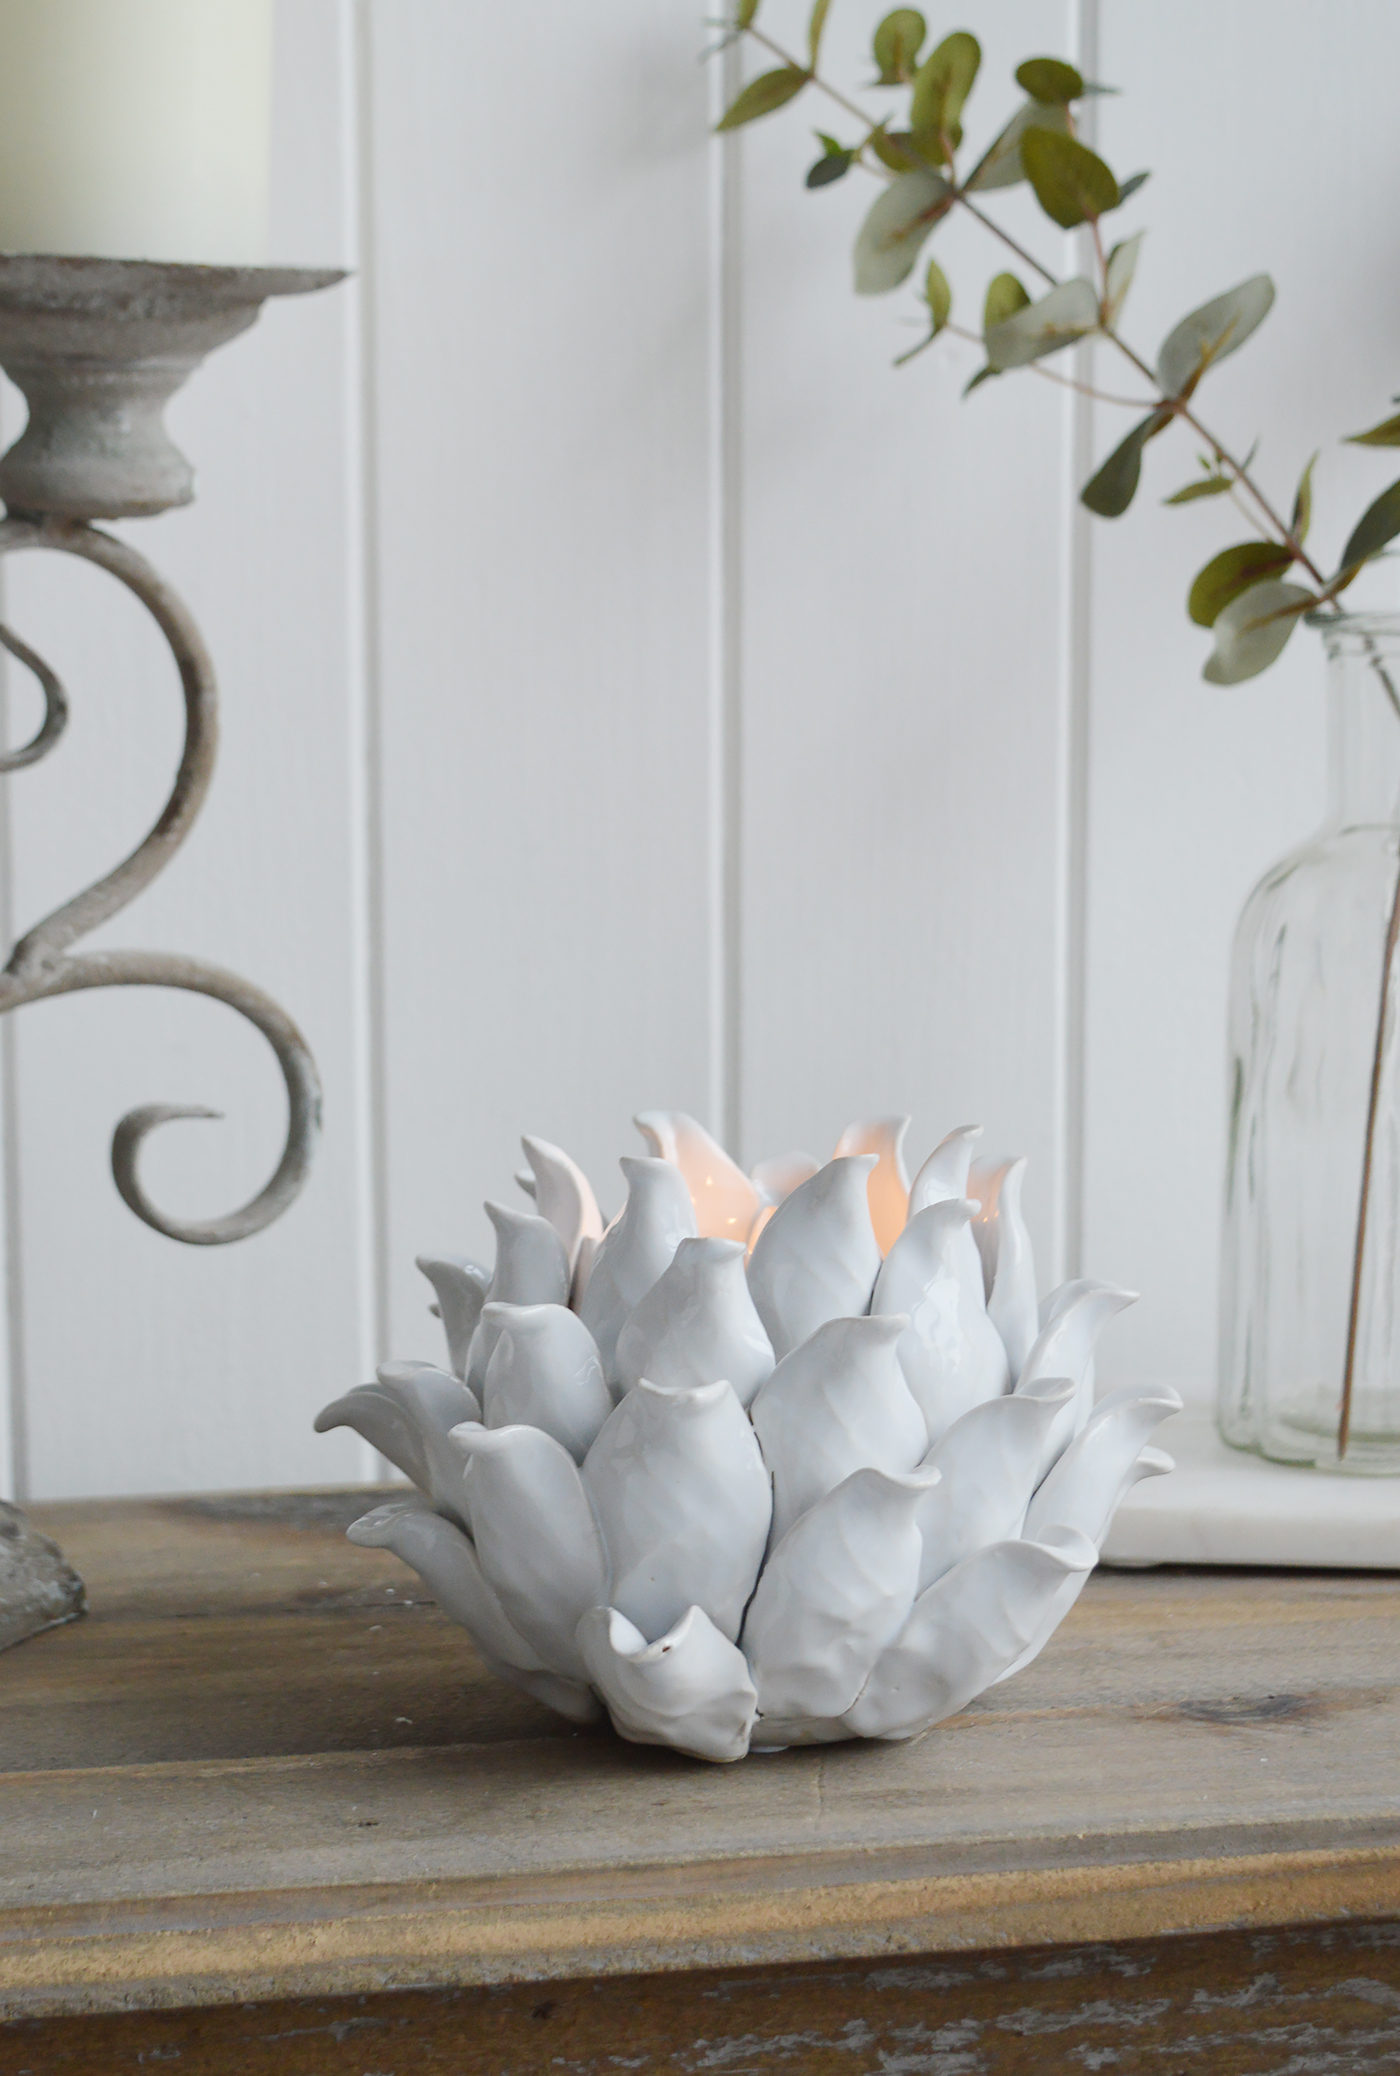 A white flower tea light holder from The White Lighthouse furniture and accessories. New England interiors. Home decor and furniture for coastal, country and city homes